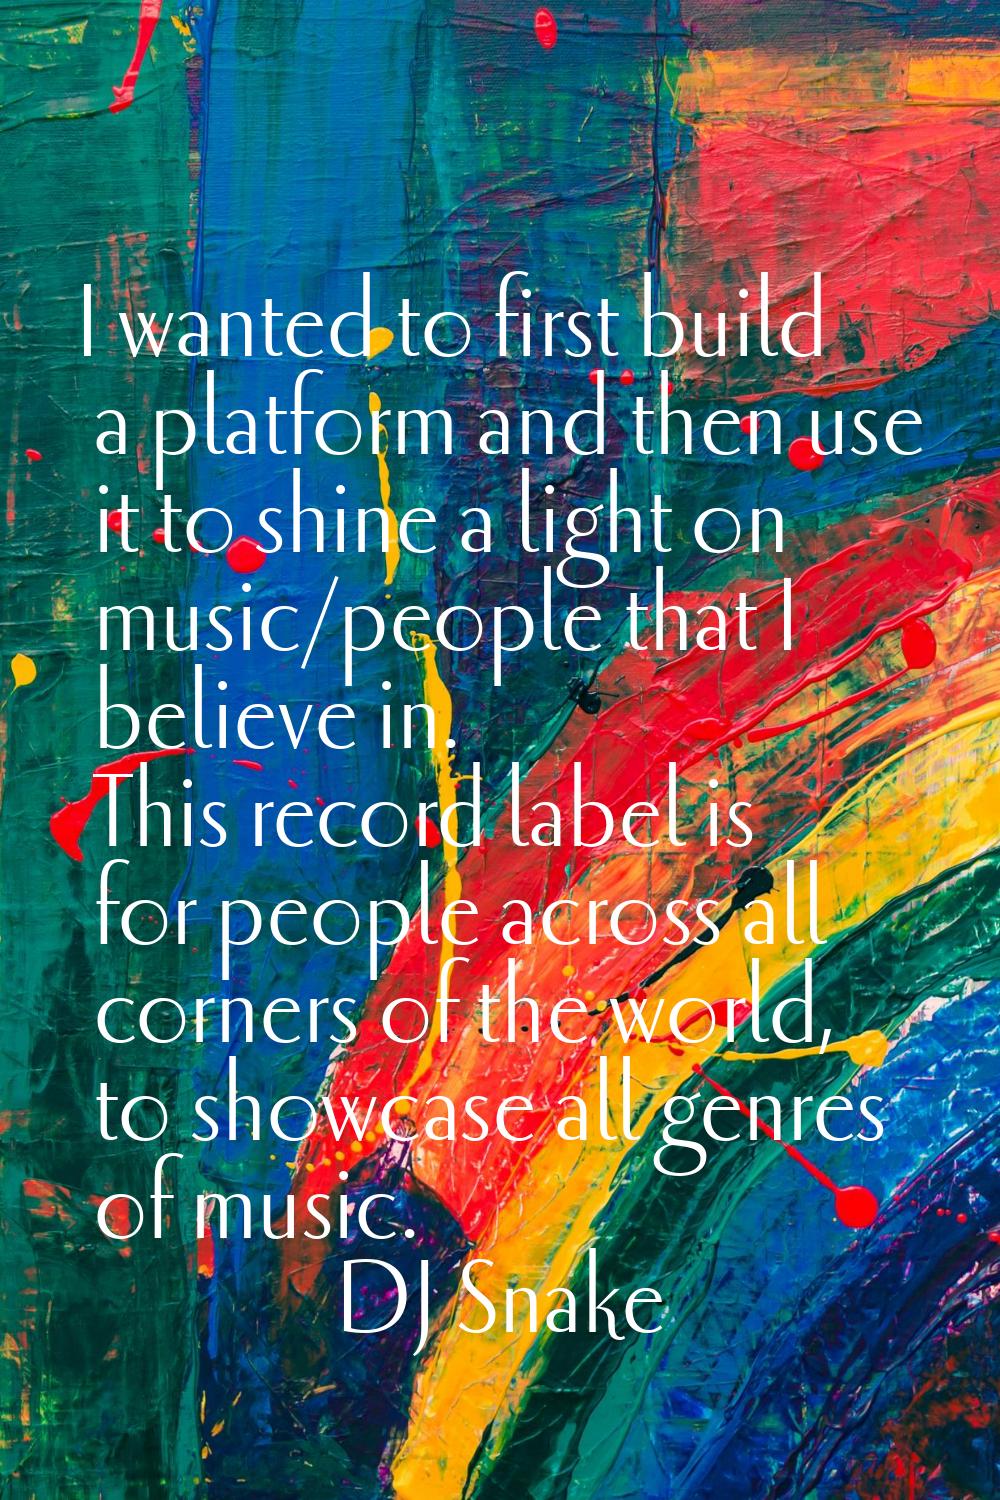 I wanted to first build a platform and then use it to shine a light on music/people that I believe 